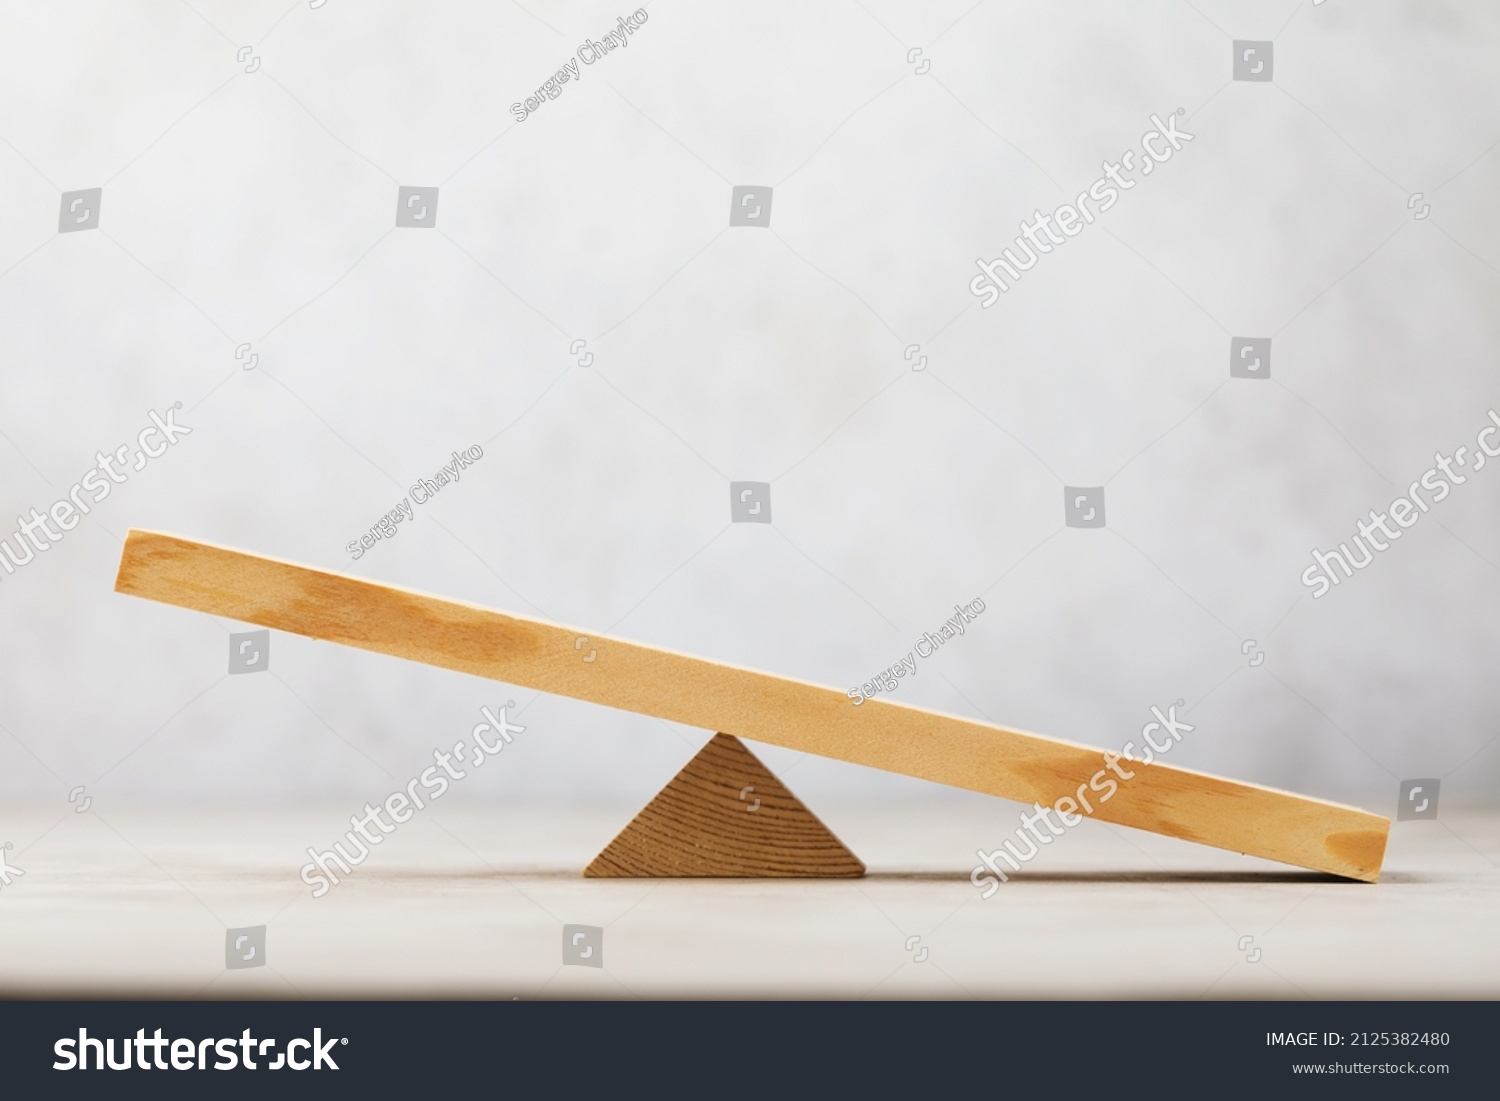 Wooden swing or scales on an abstract background, a template for the designer #2125382480